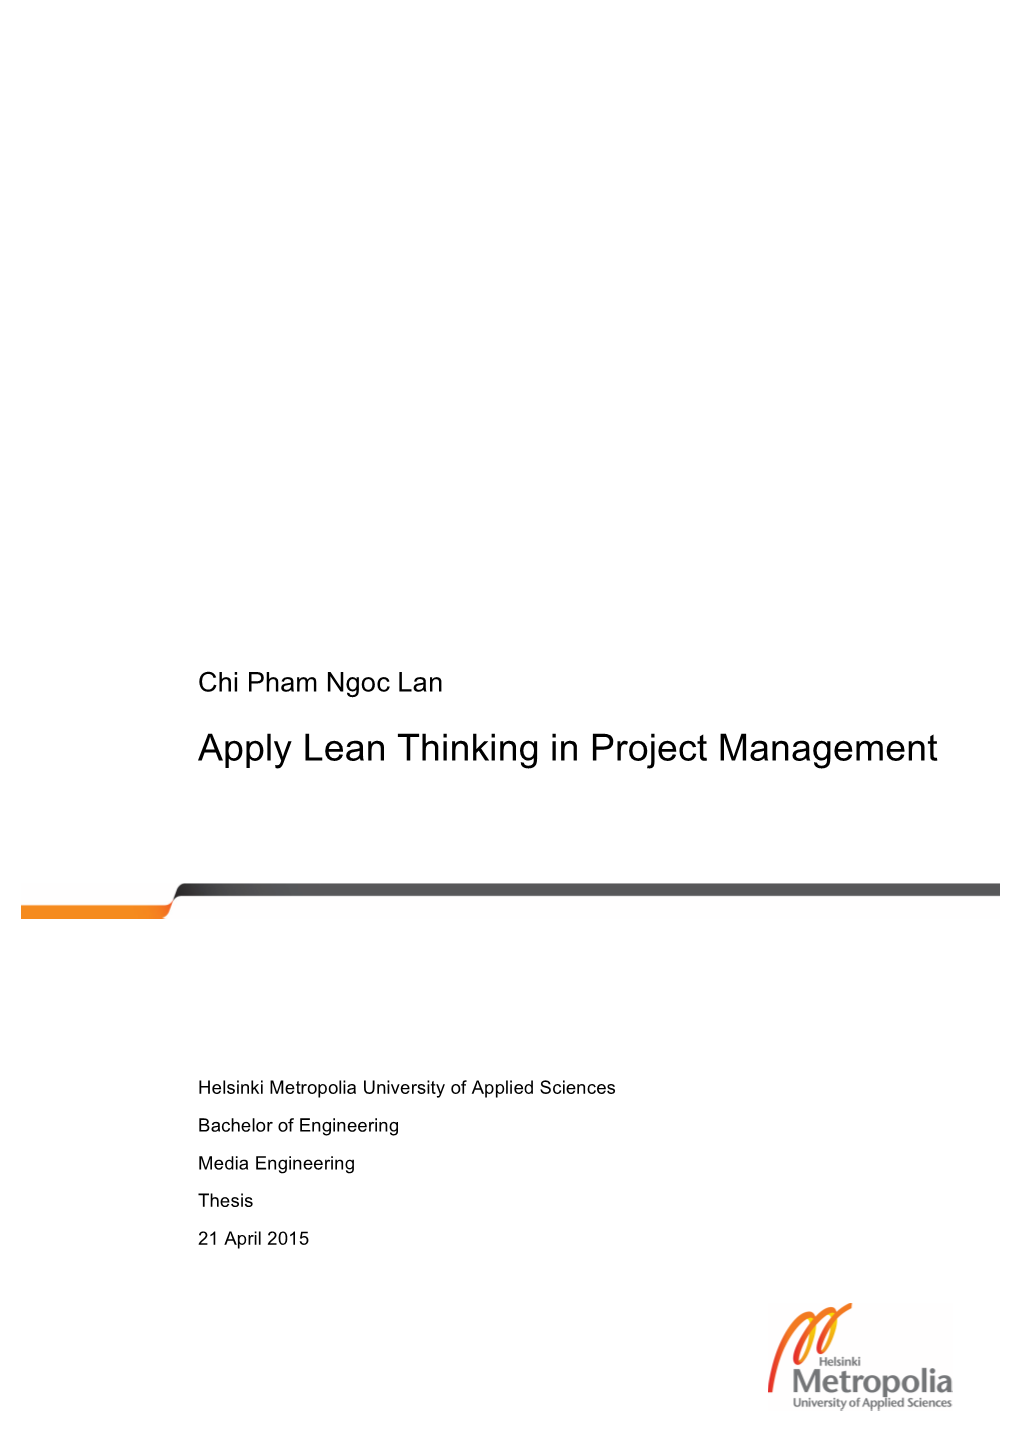 Apply Lean Thinking in Project Management